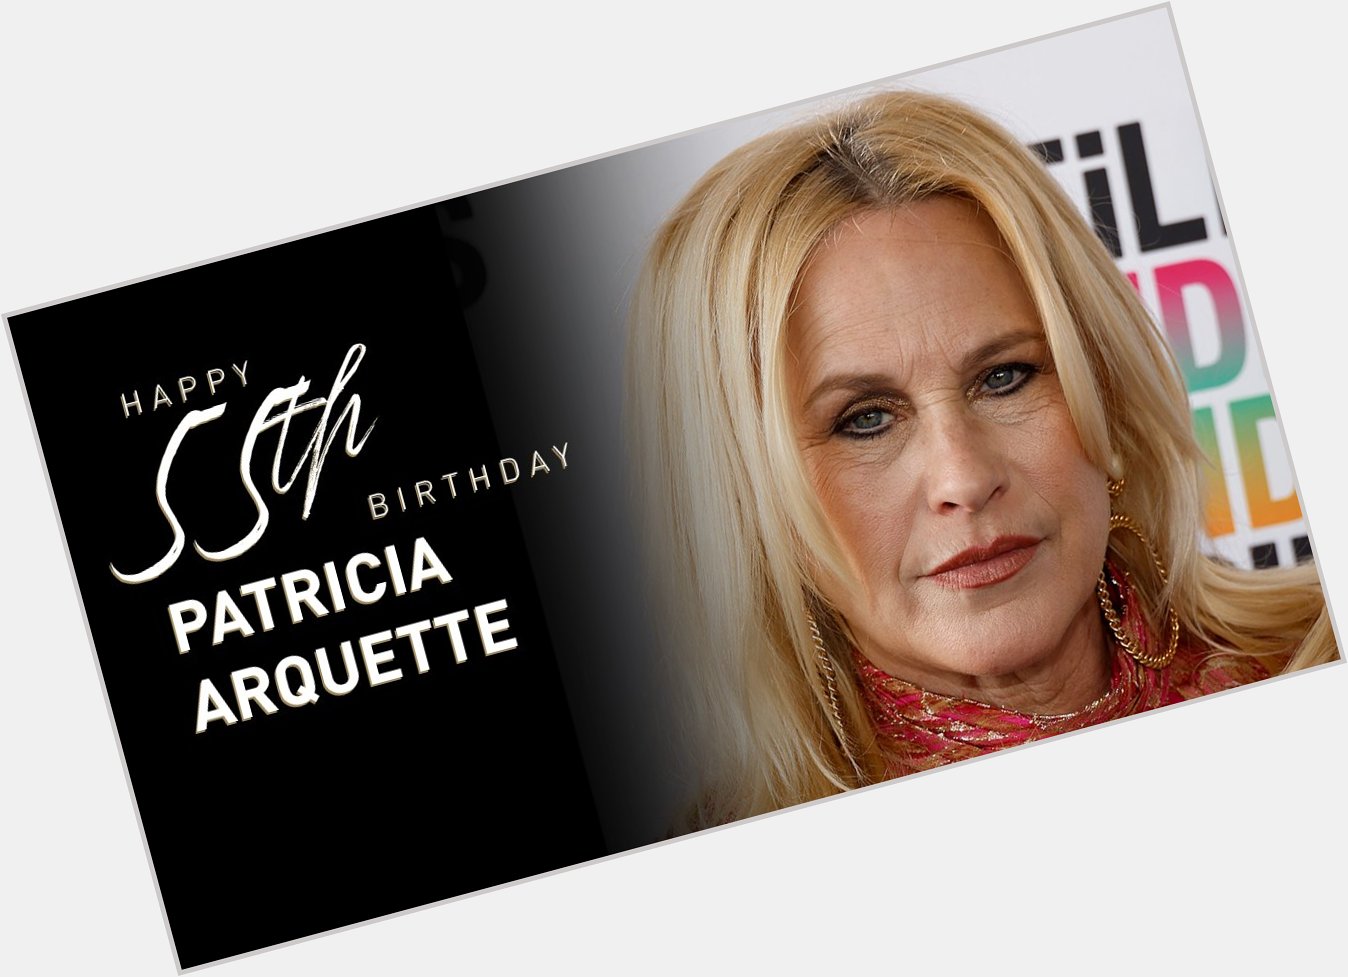 Happy 55th birthday Patricia Arquette! 

Watch her tribute here:  